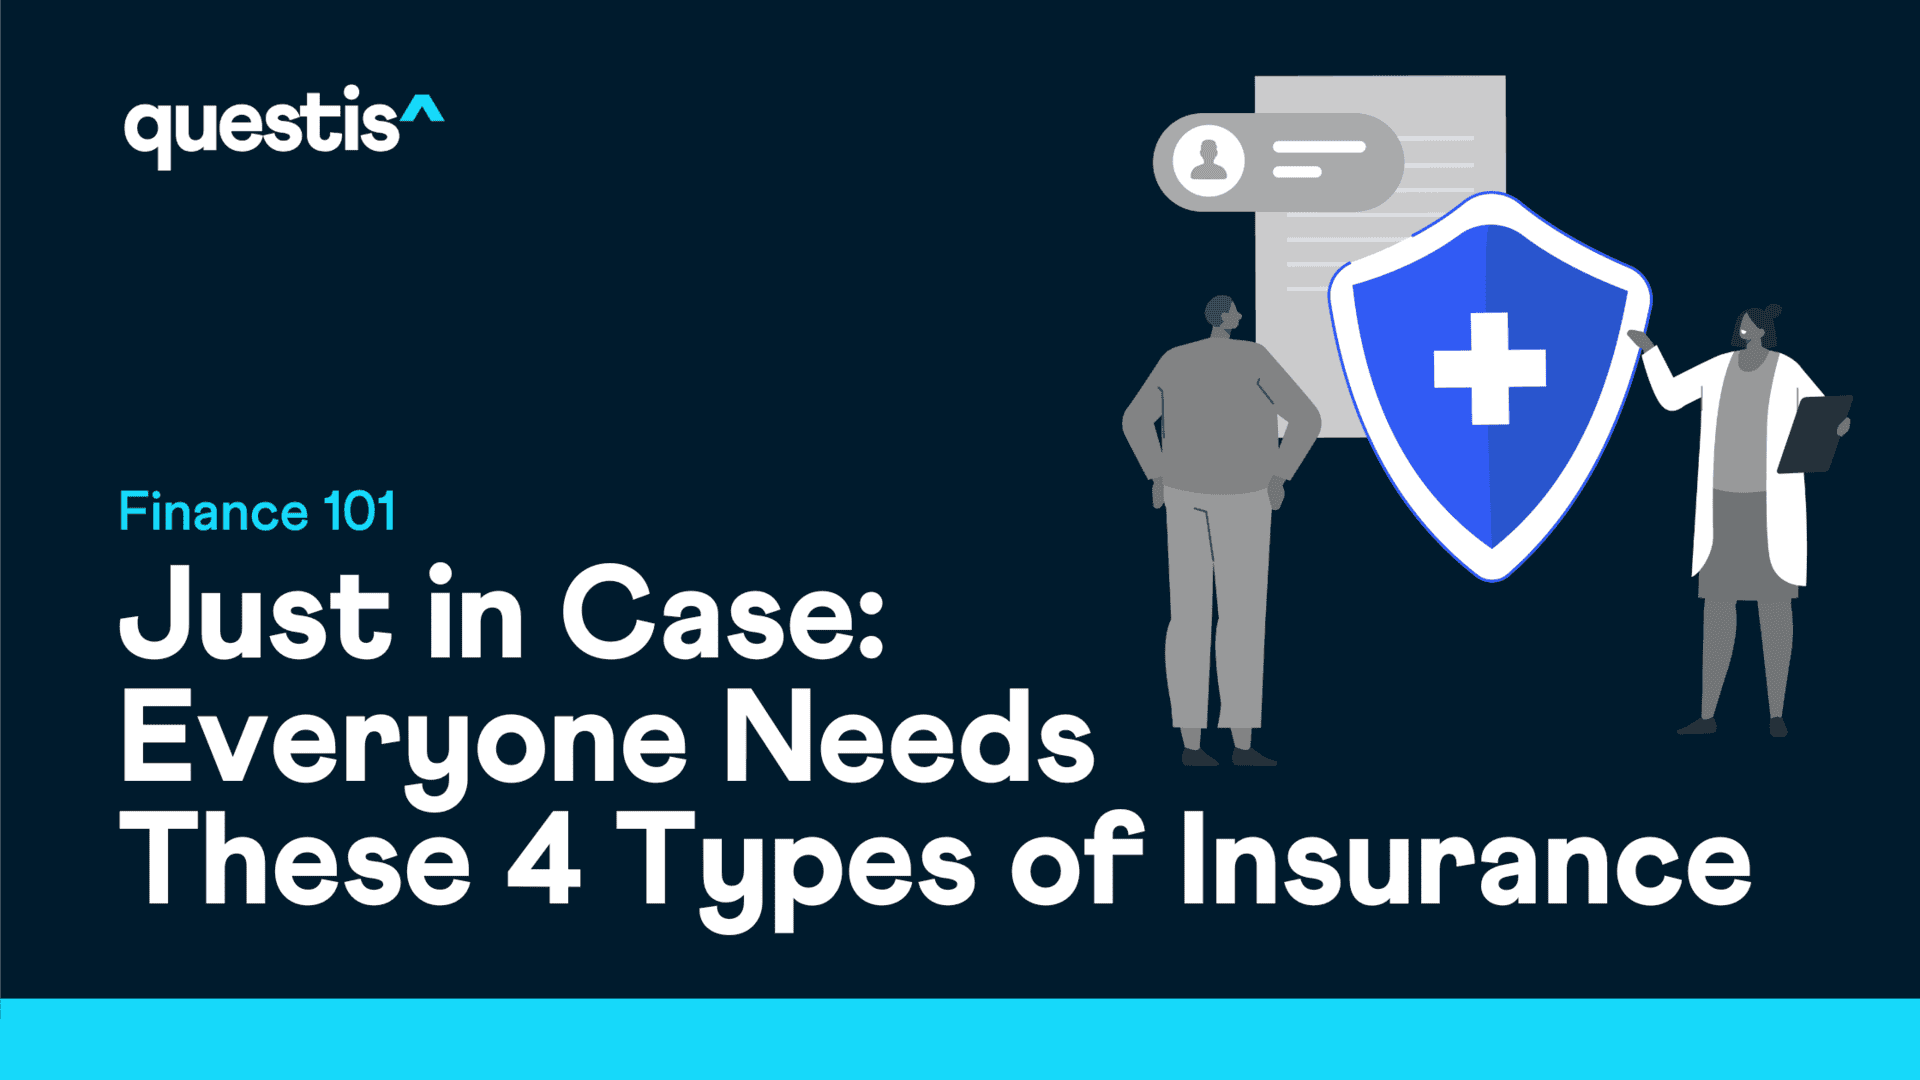 Just in case: Everyone Needs these 4 types of insurance